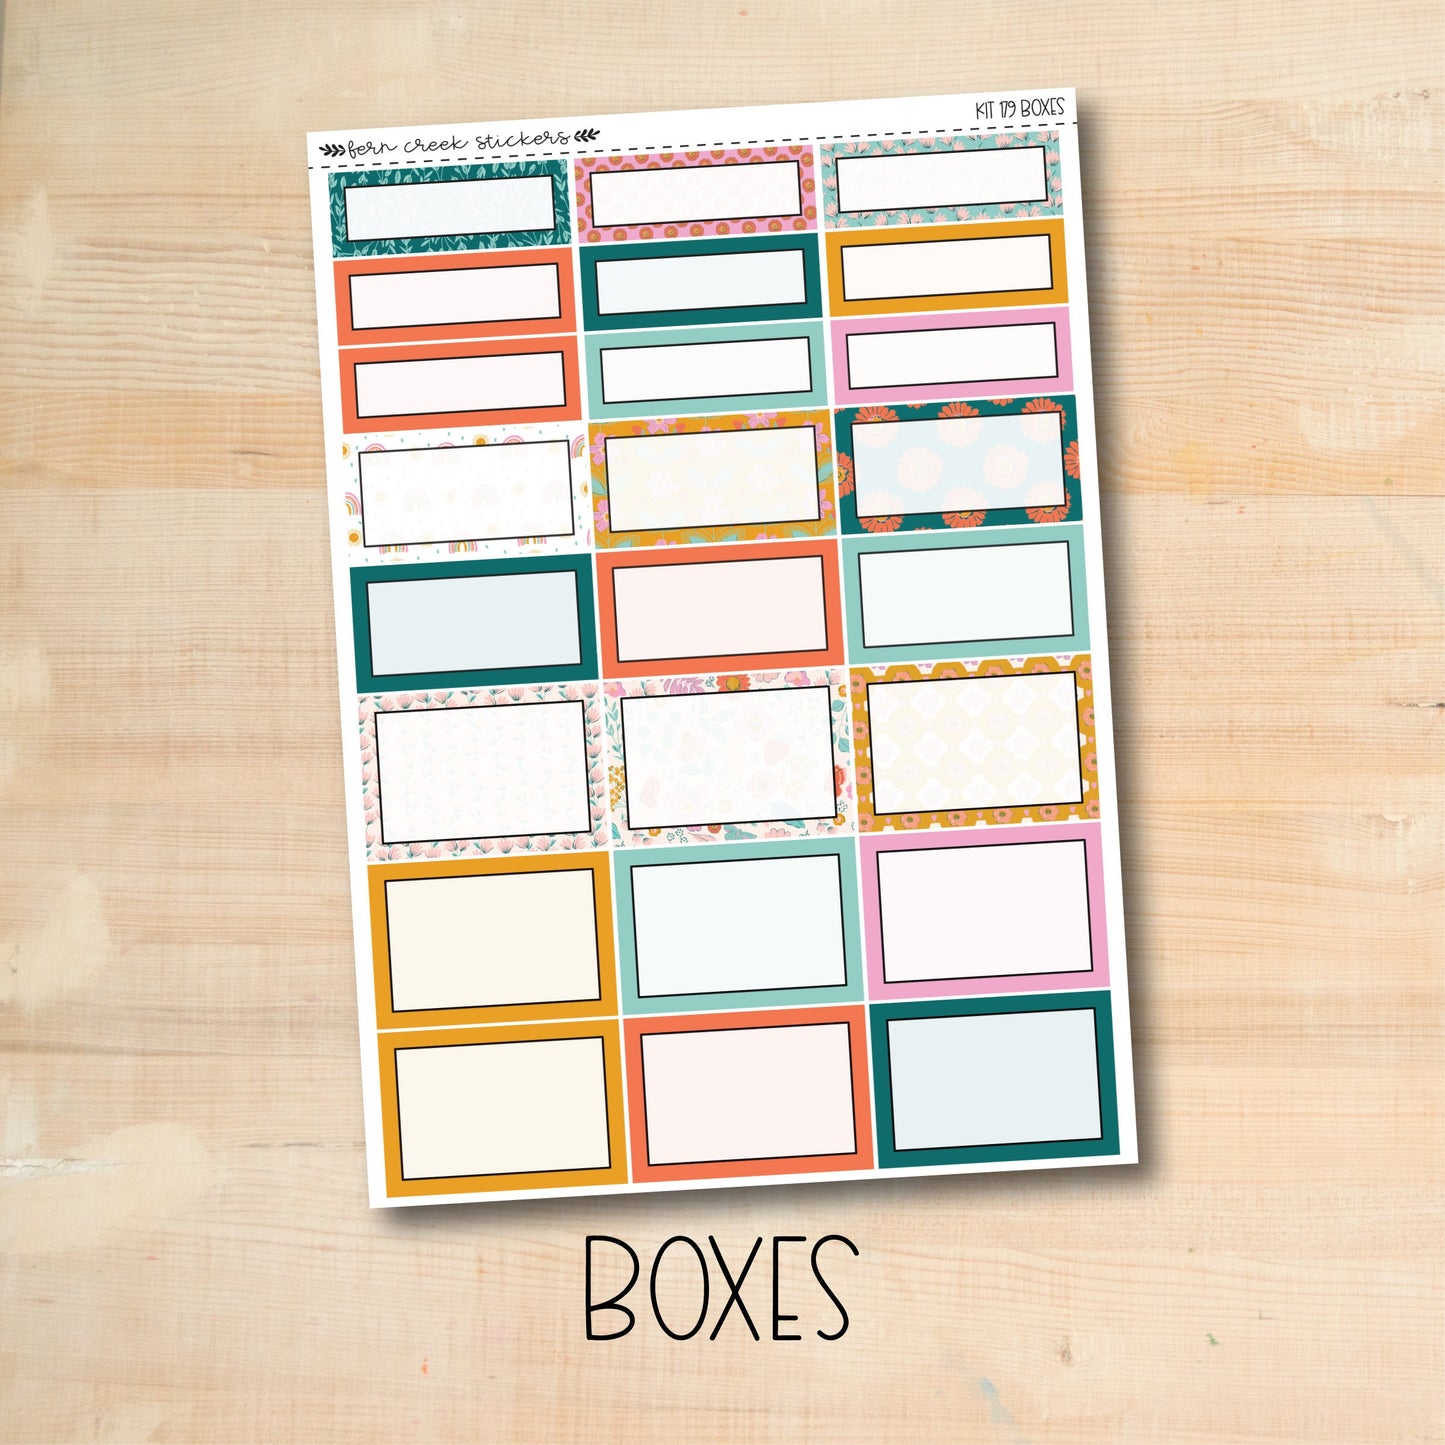 KIT-179 || SUMMER SUN weekly planner kit for Erin Condren, Plum Paper, MakseLife and more!